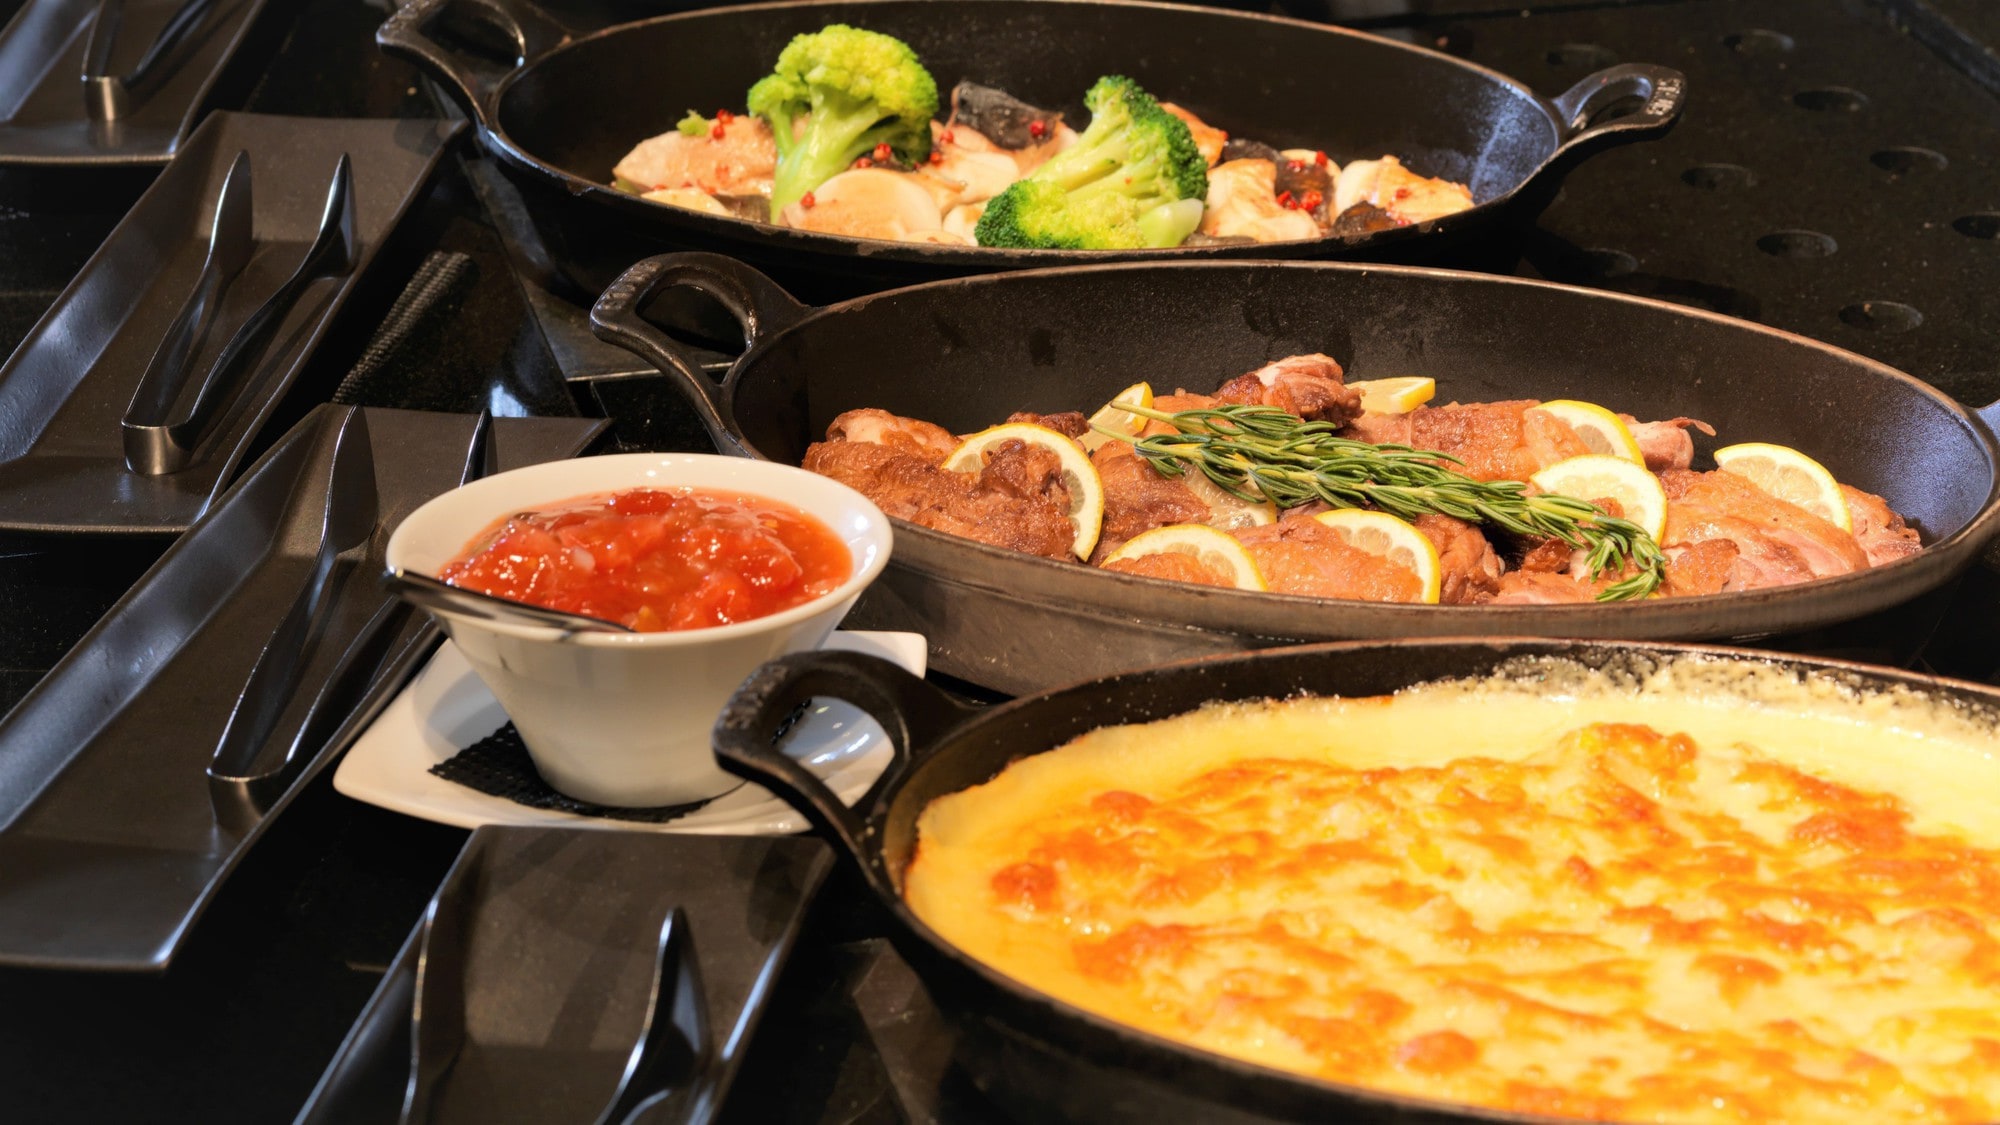 [Forest Buffet] A restaurant with various treats such as pasta, risotto, and gratin (dinner image)